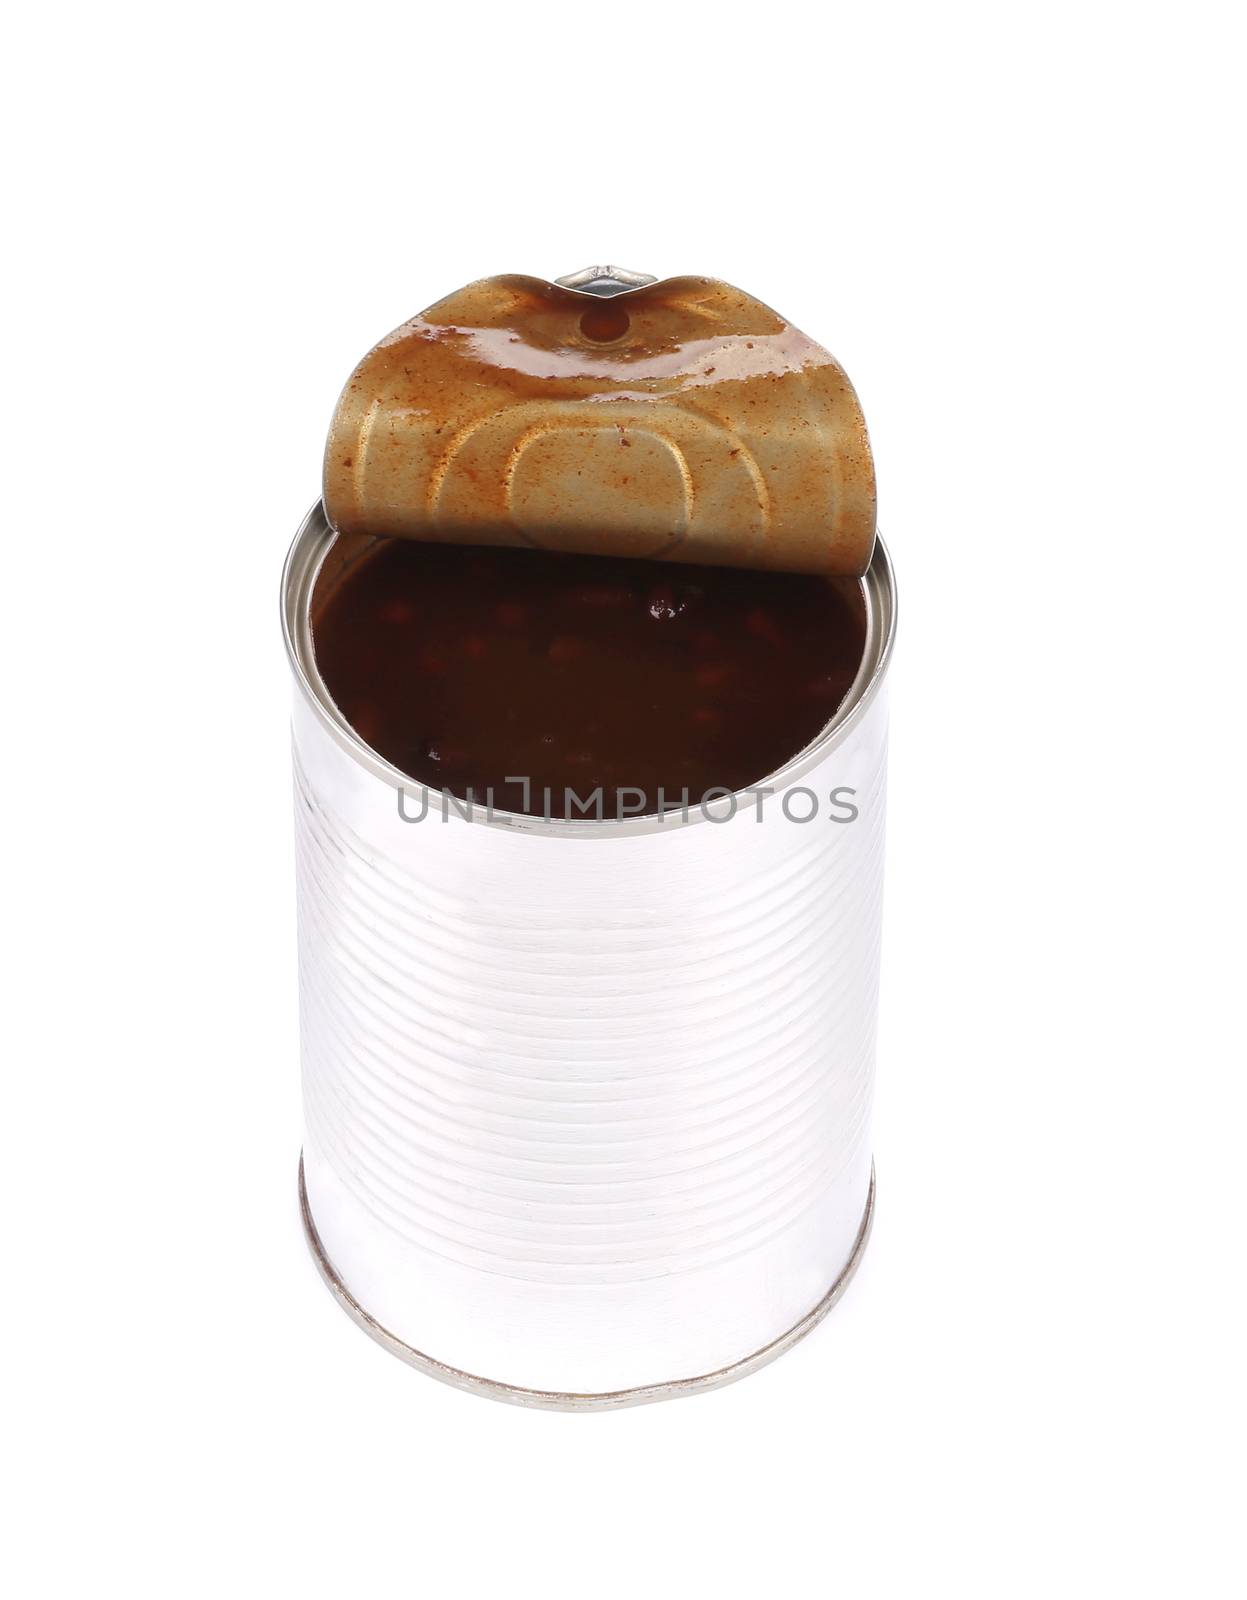 Opened tin can with beans. Isolated on a white background.